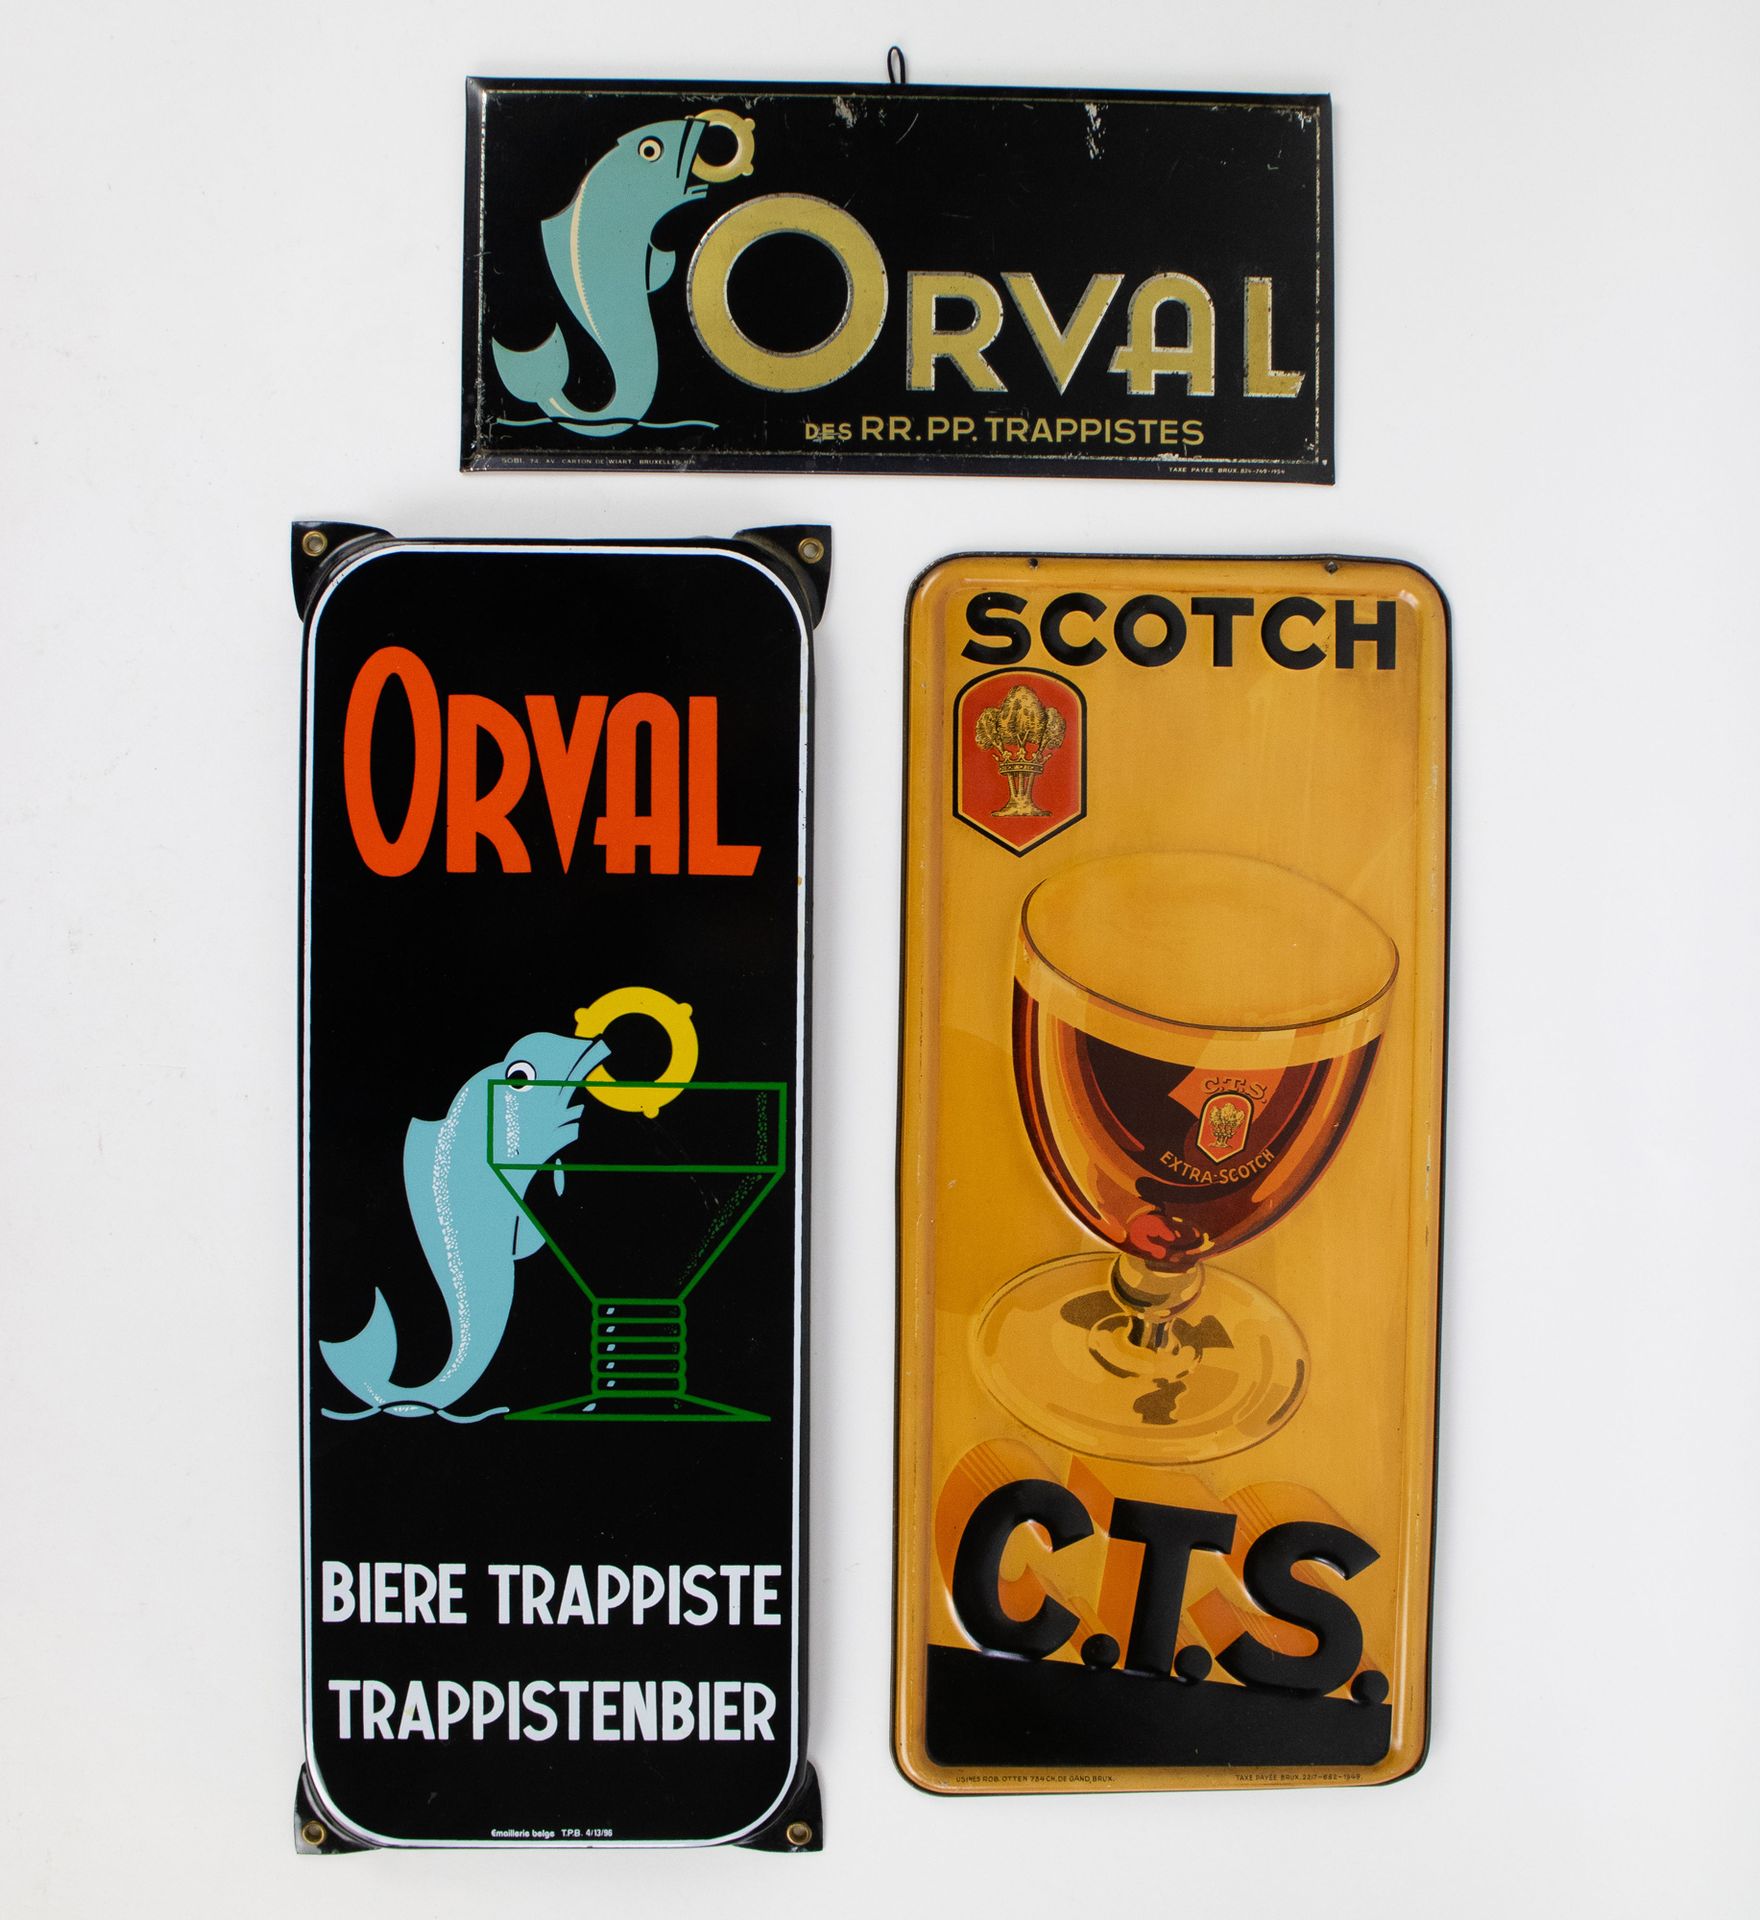 Null Metal Orval 1954, Scotch C.T.S. 1949 et Emaille ORVAL trappistenbier
Metal &hellip;